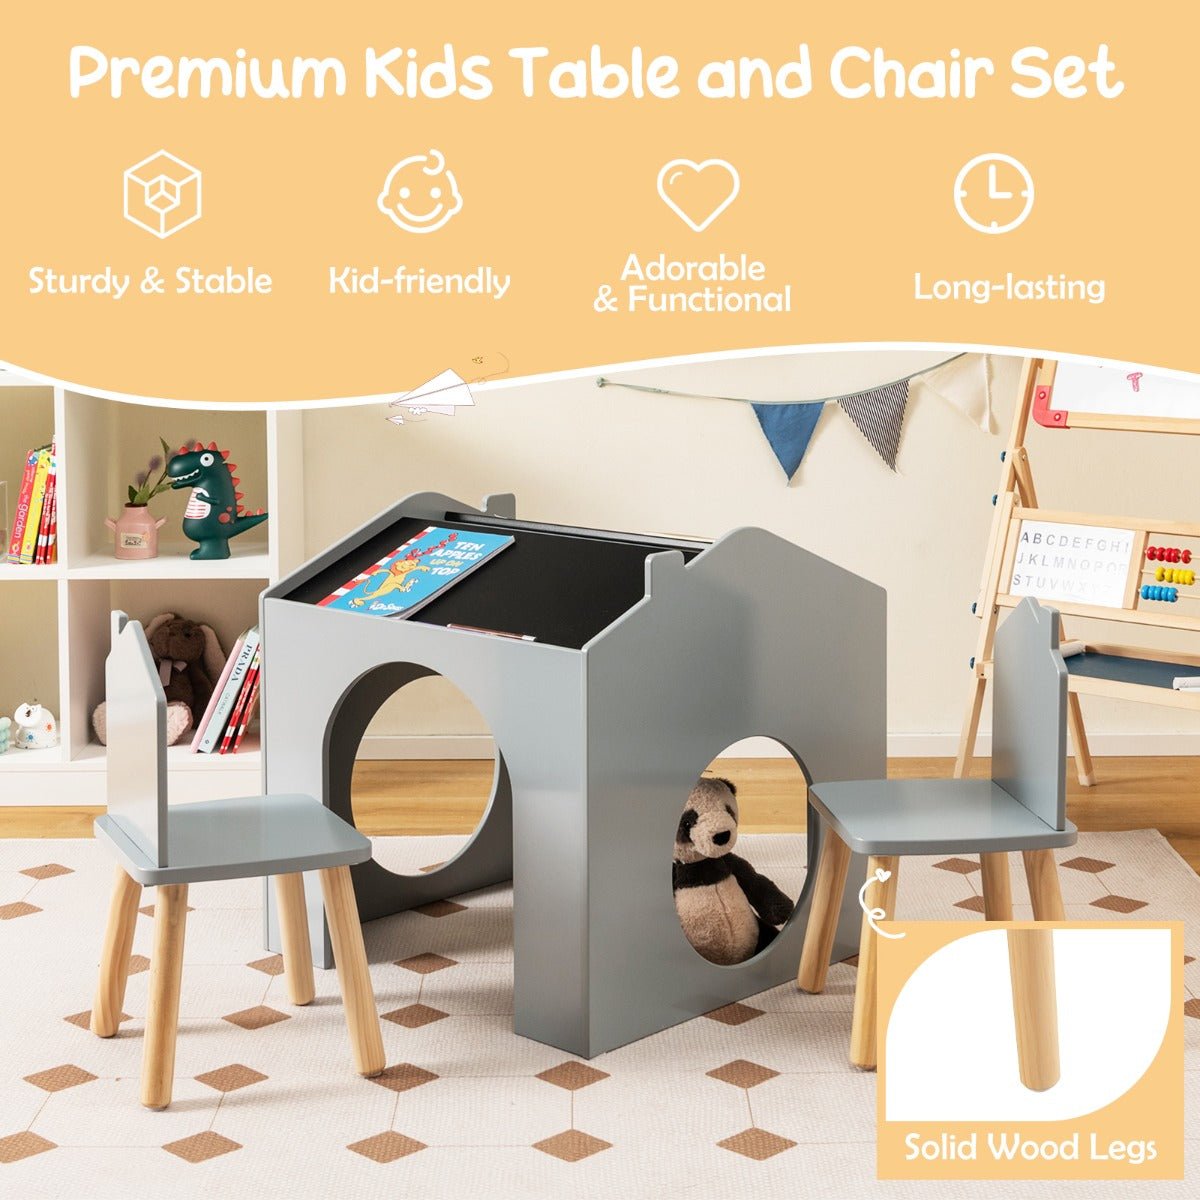 Nurturing Chalkboard Set: Grey Wooden Table and Chair Ensemble for Kids